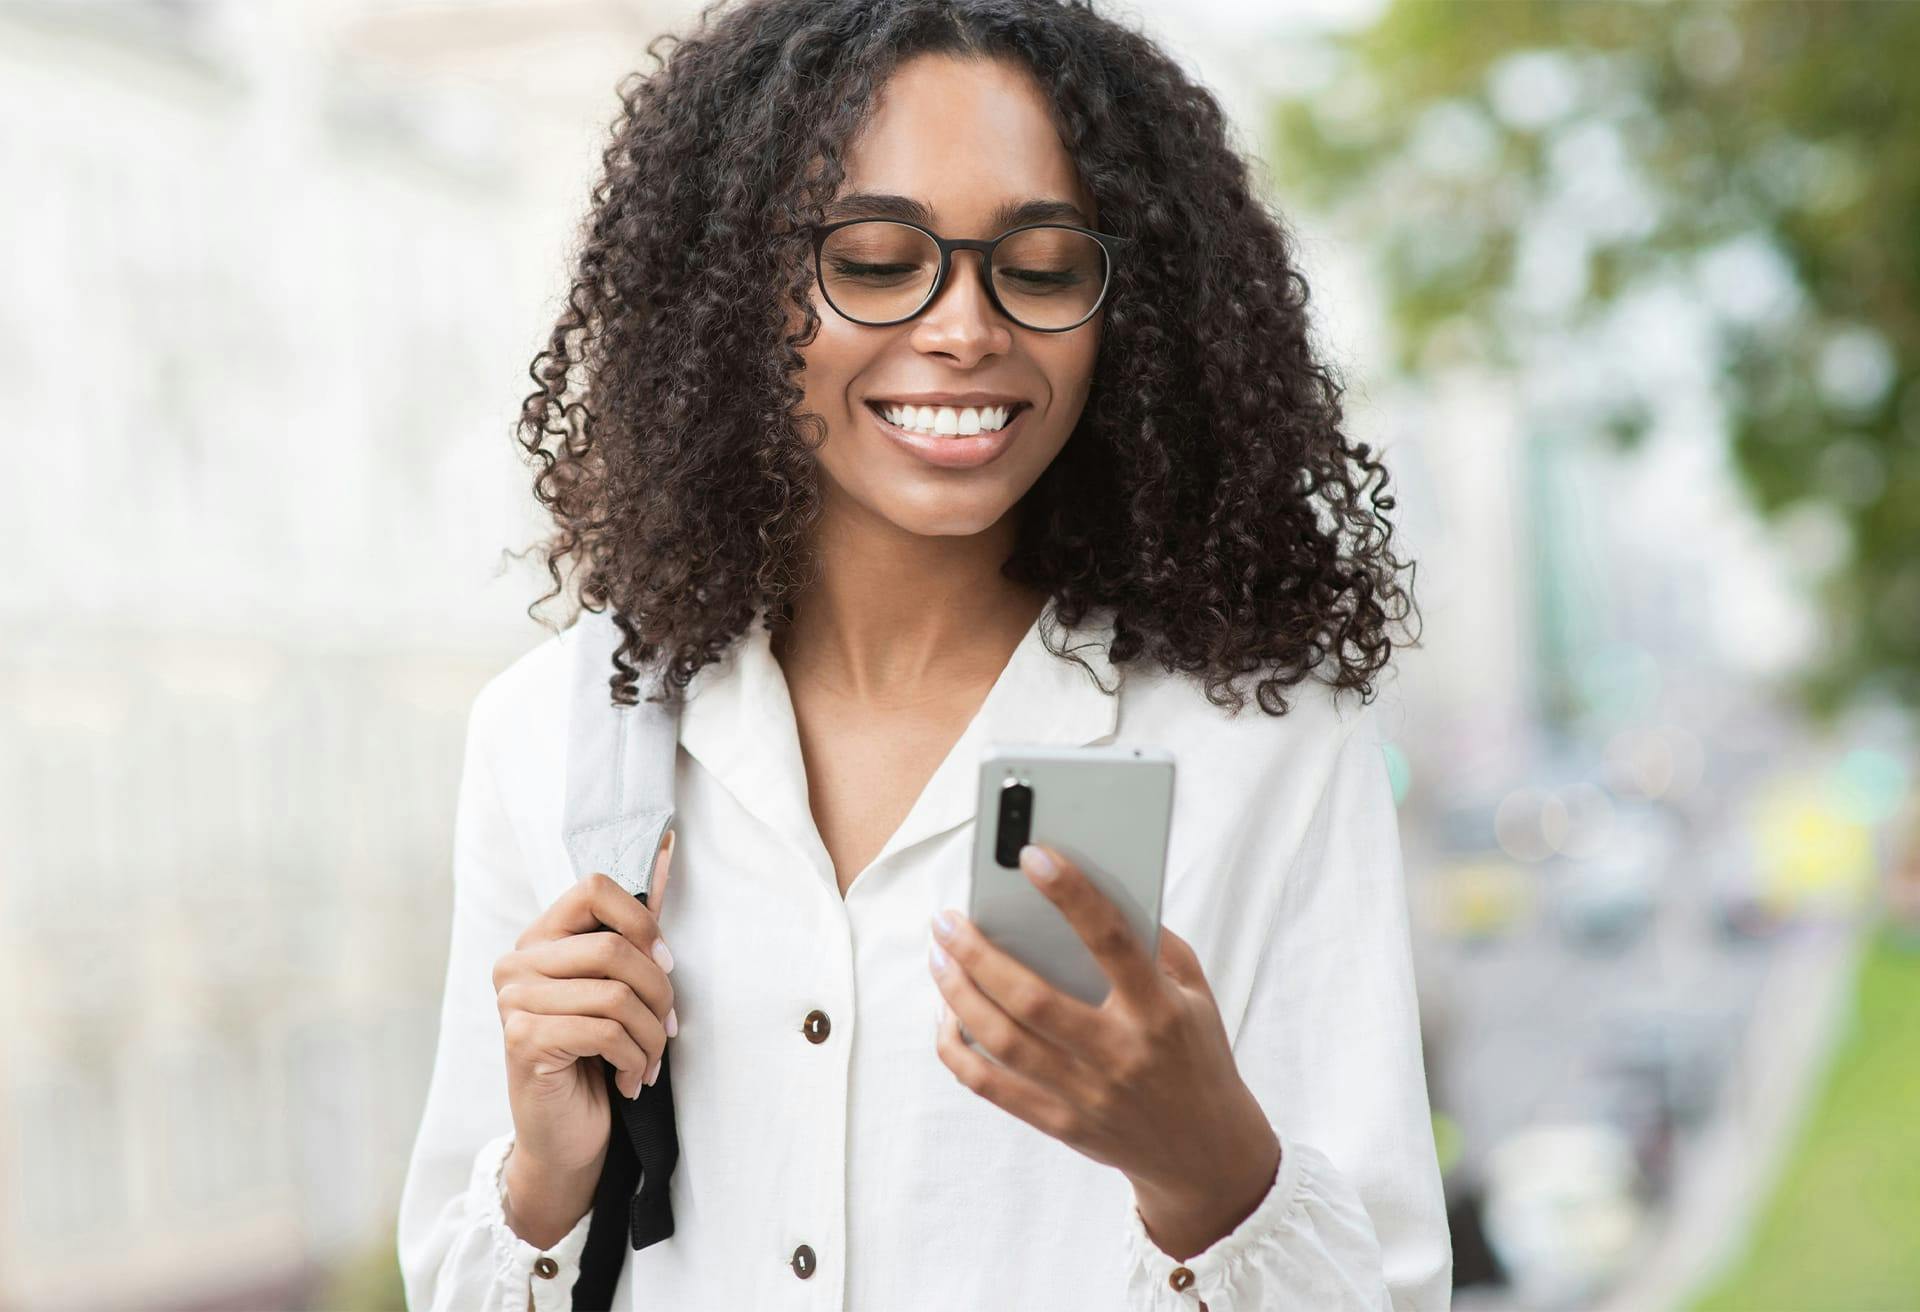 African American woman in white shirt smiling at her phone